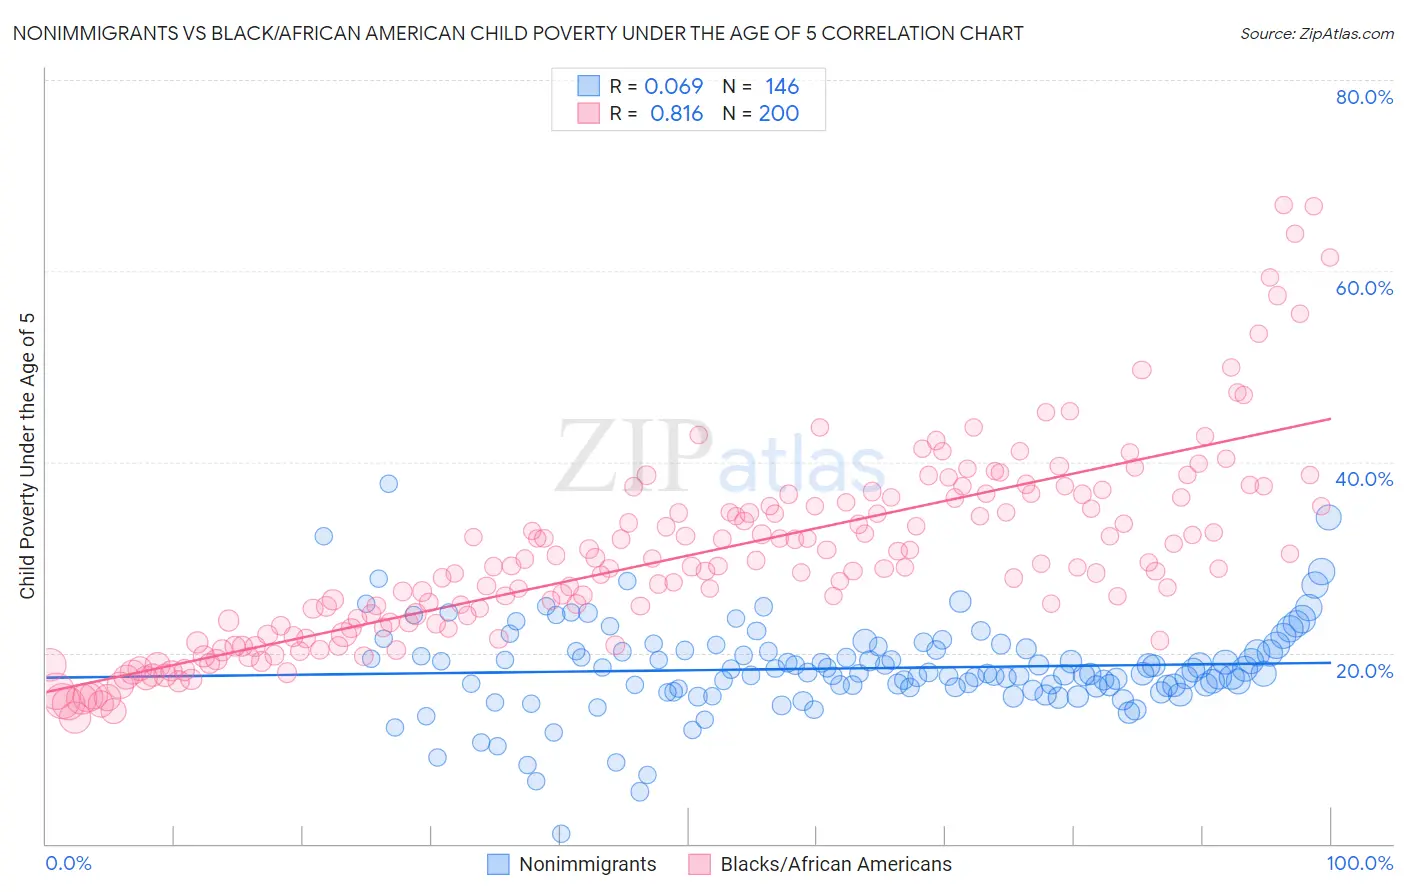 Nonimmigrants vs Black/African American Child Poverty Under the Age of 5